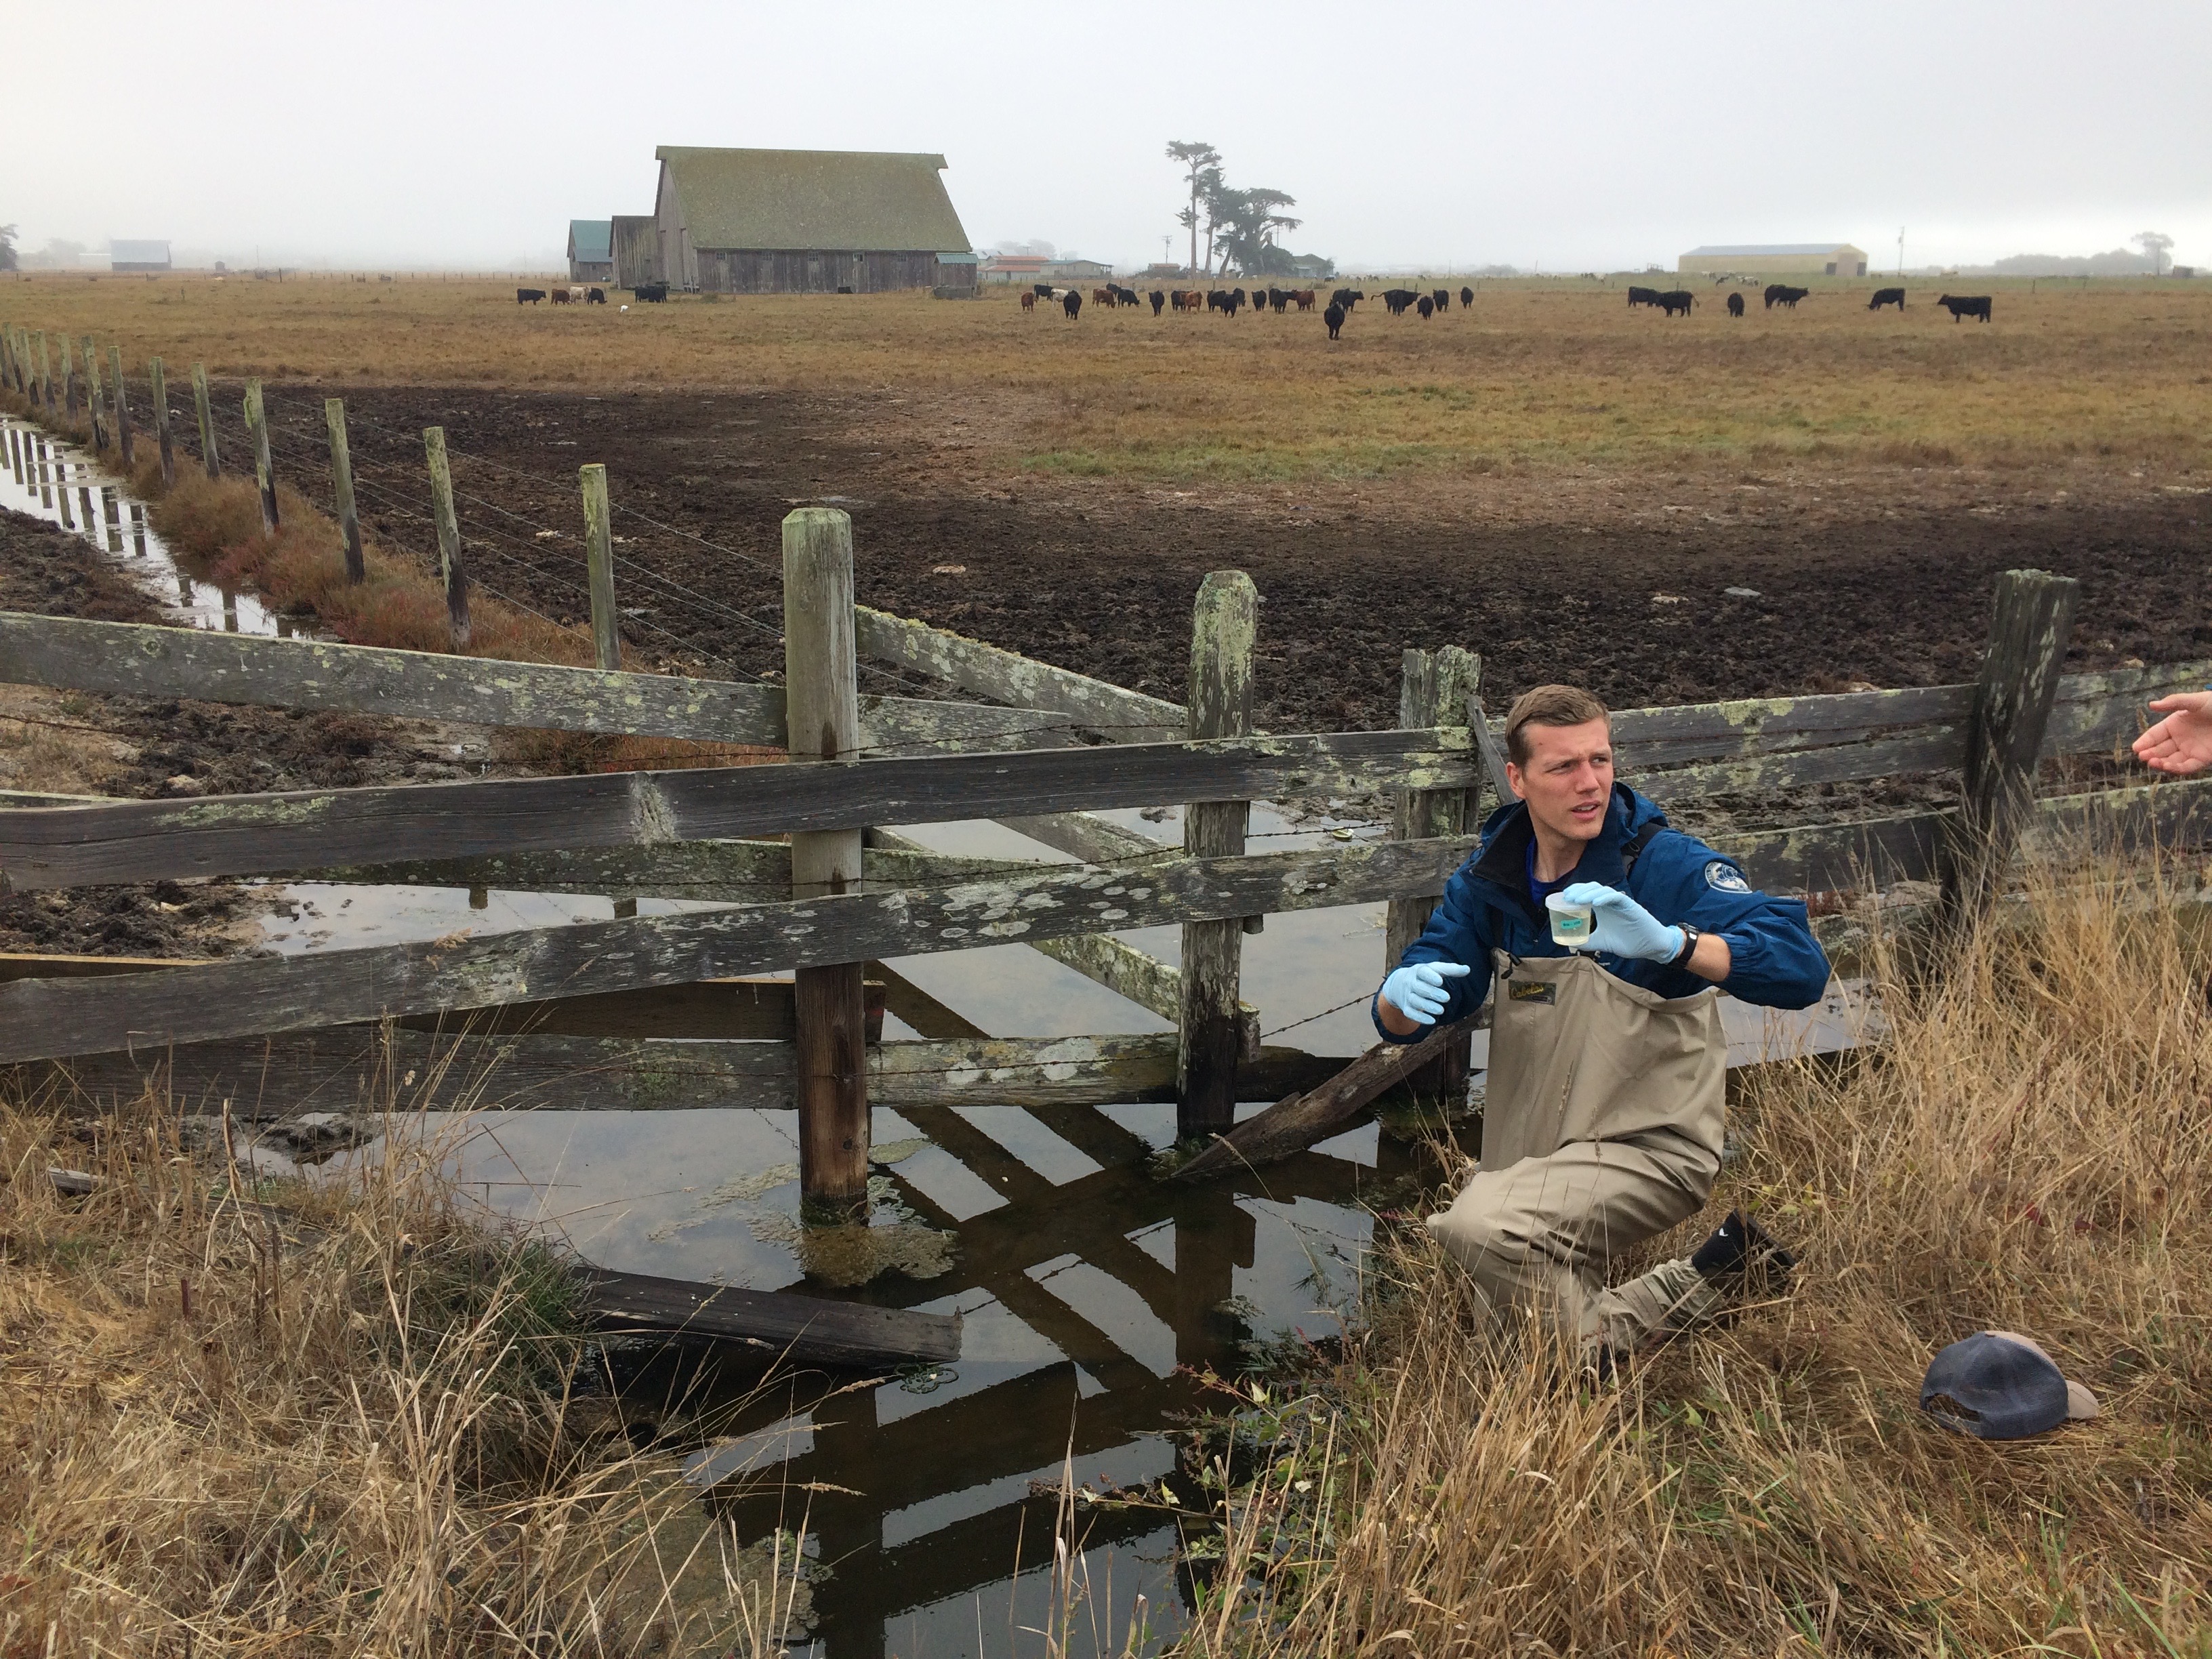 member of the Watershed Stewardship Program, collecting water samples  from cattle pasture runoff. Photo credit Jennifer Kalt of Humboldt Baykeeper